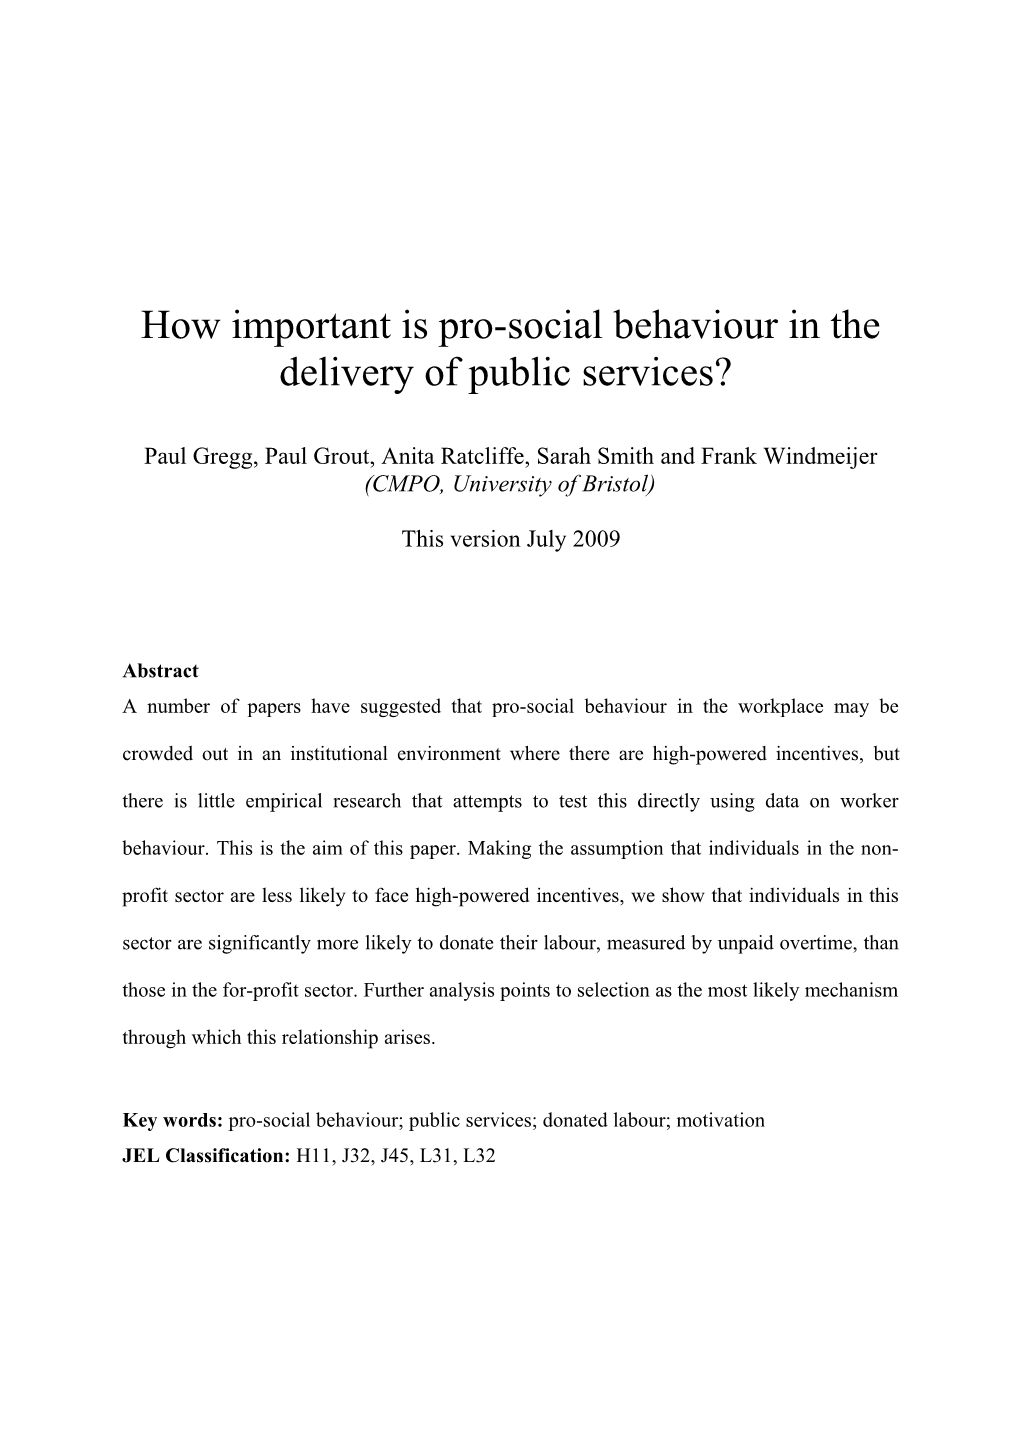 How Important Is Pro-Social Behaviour in the Delivery of Public Services?